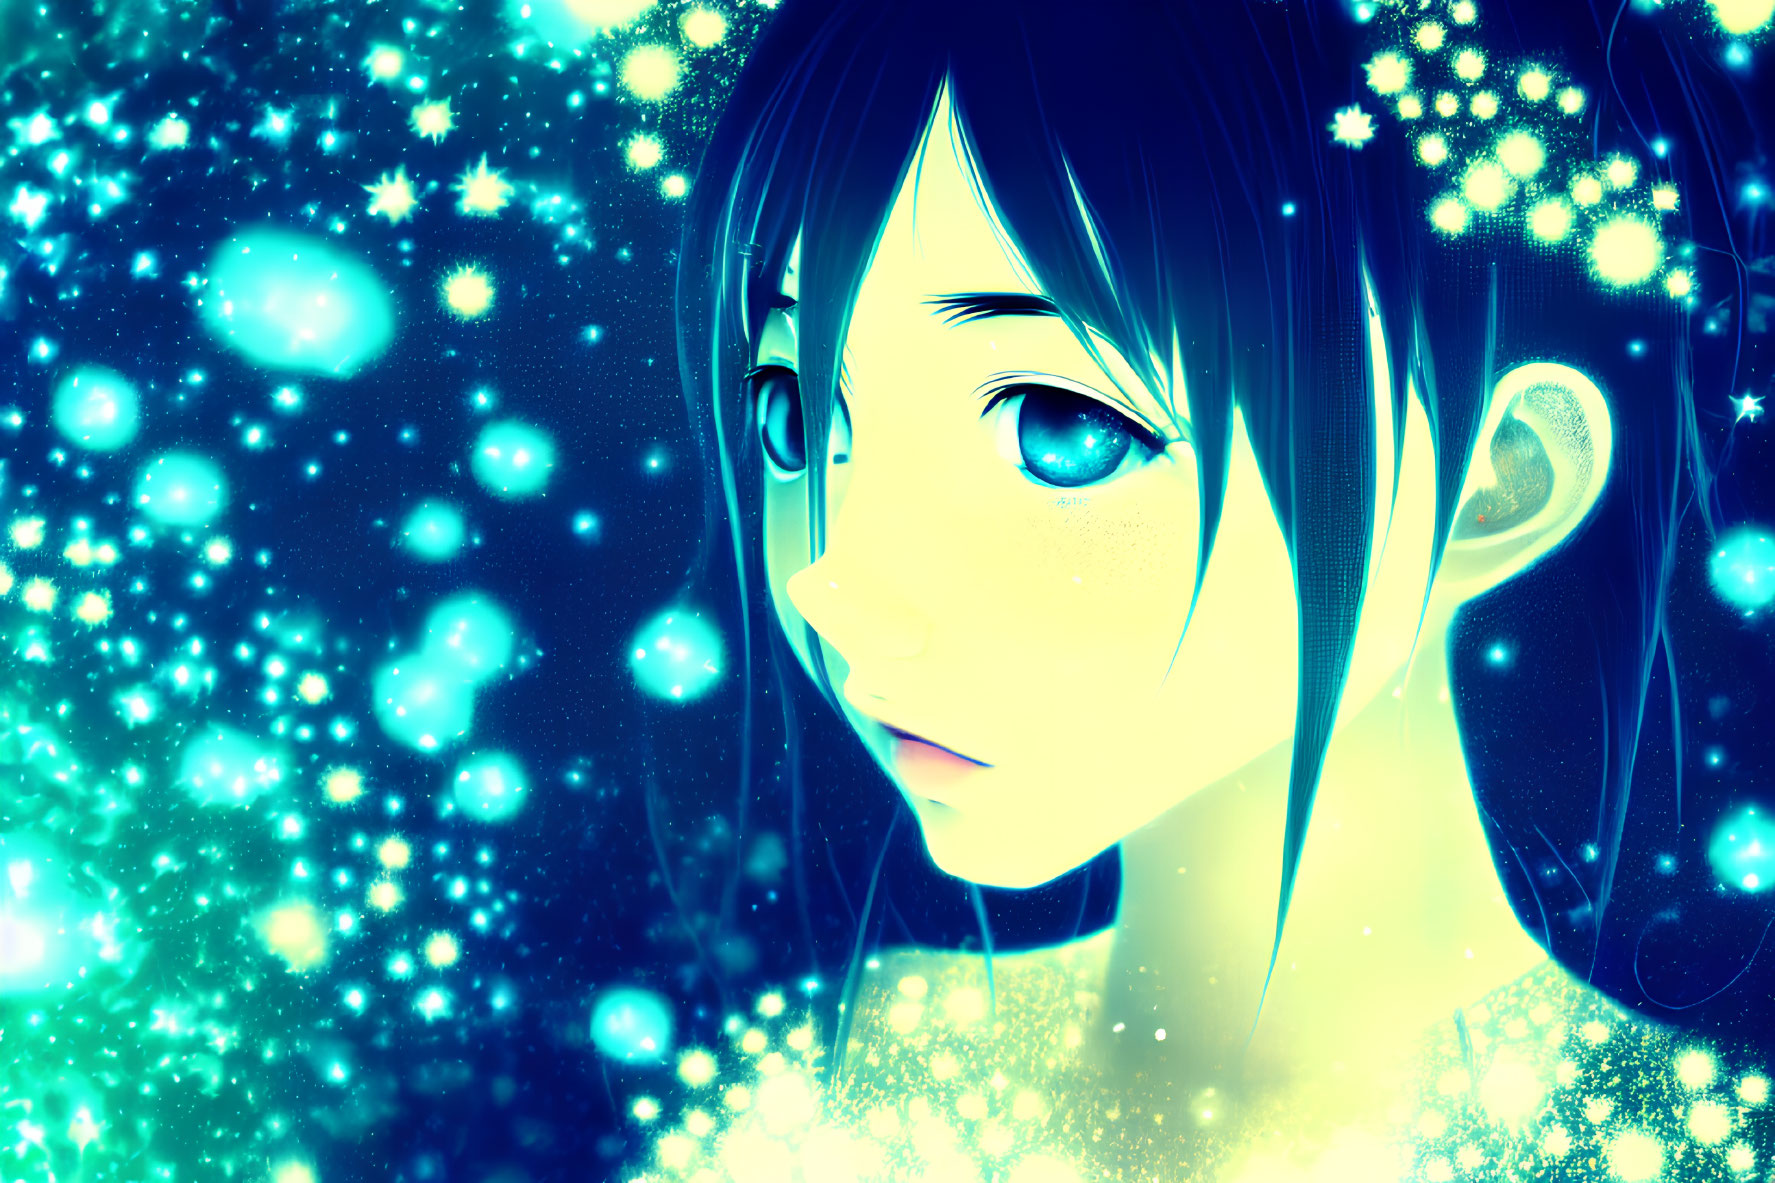 Illustration of girl with blue eyes and dark hair in cosmic setting